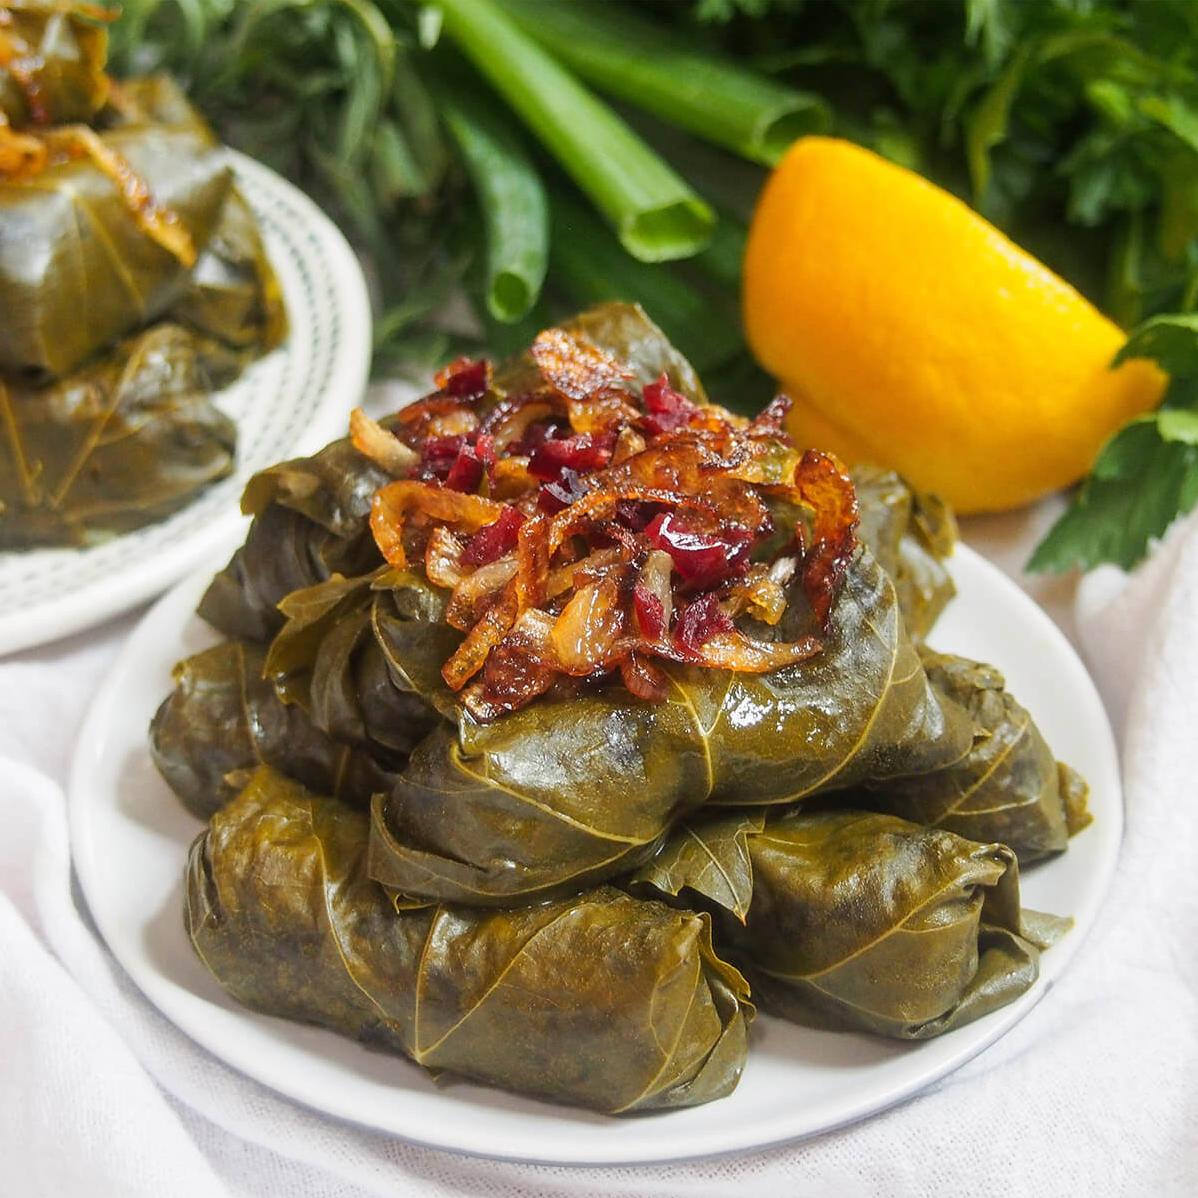  Deliciously savory and tangy stuffed grape leaves.